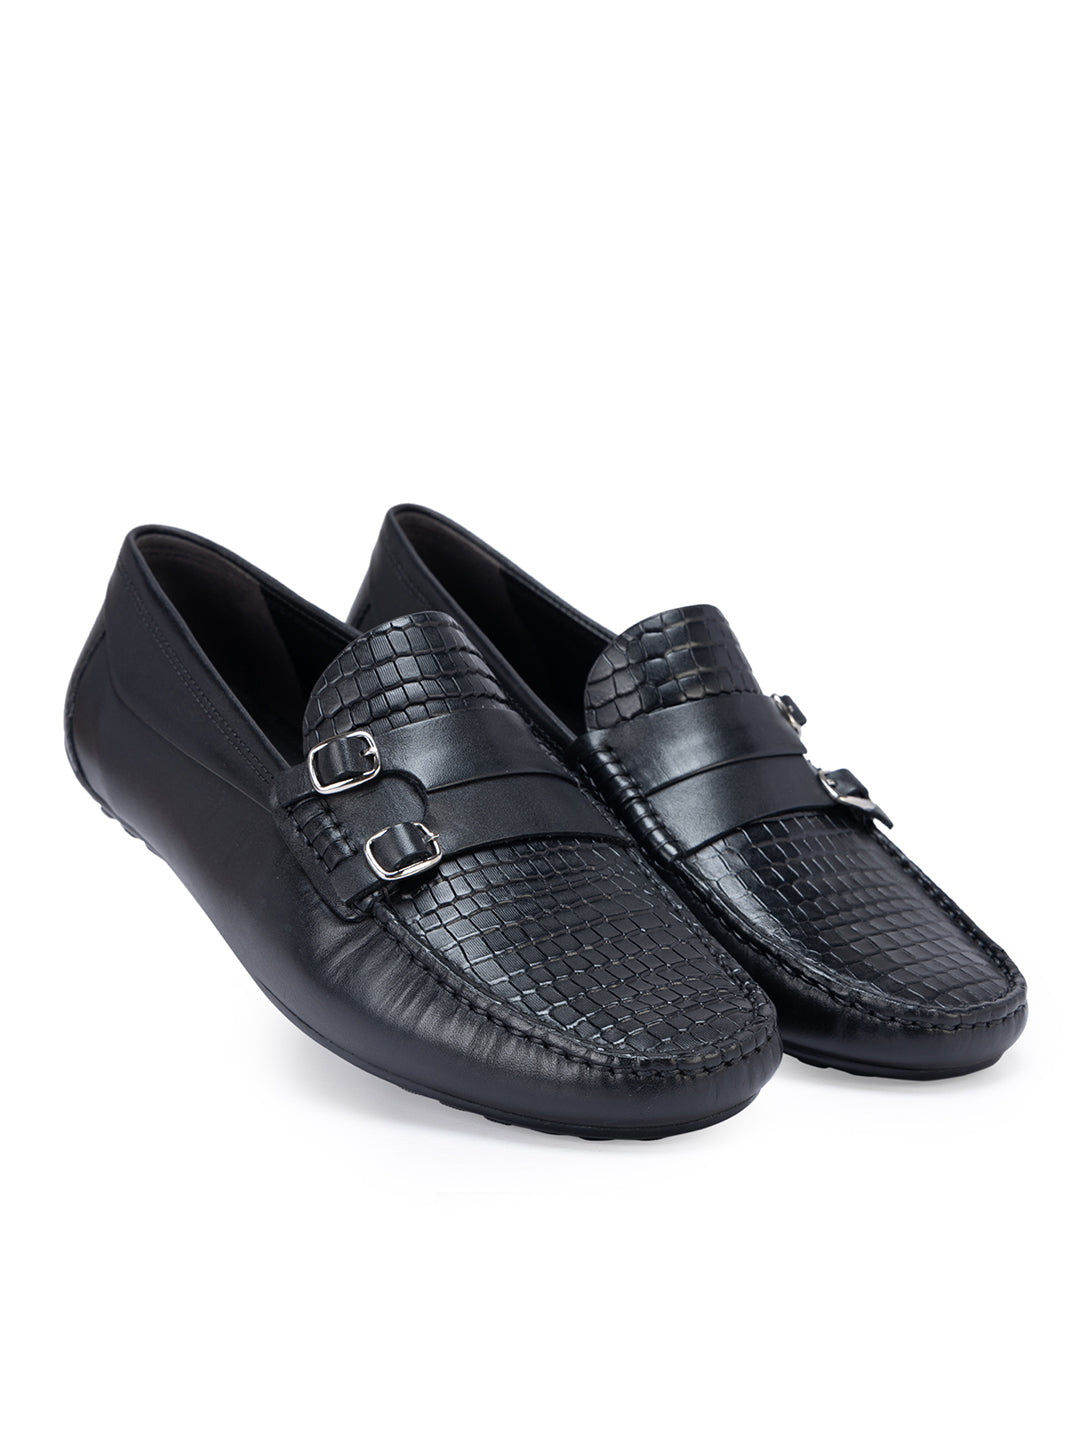 Black Textured Monk Style Moccasins